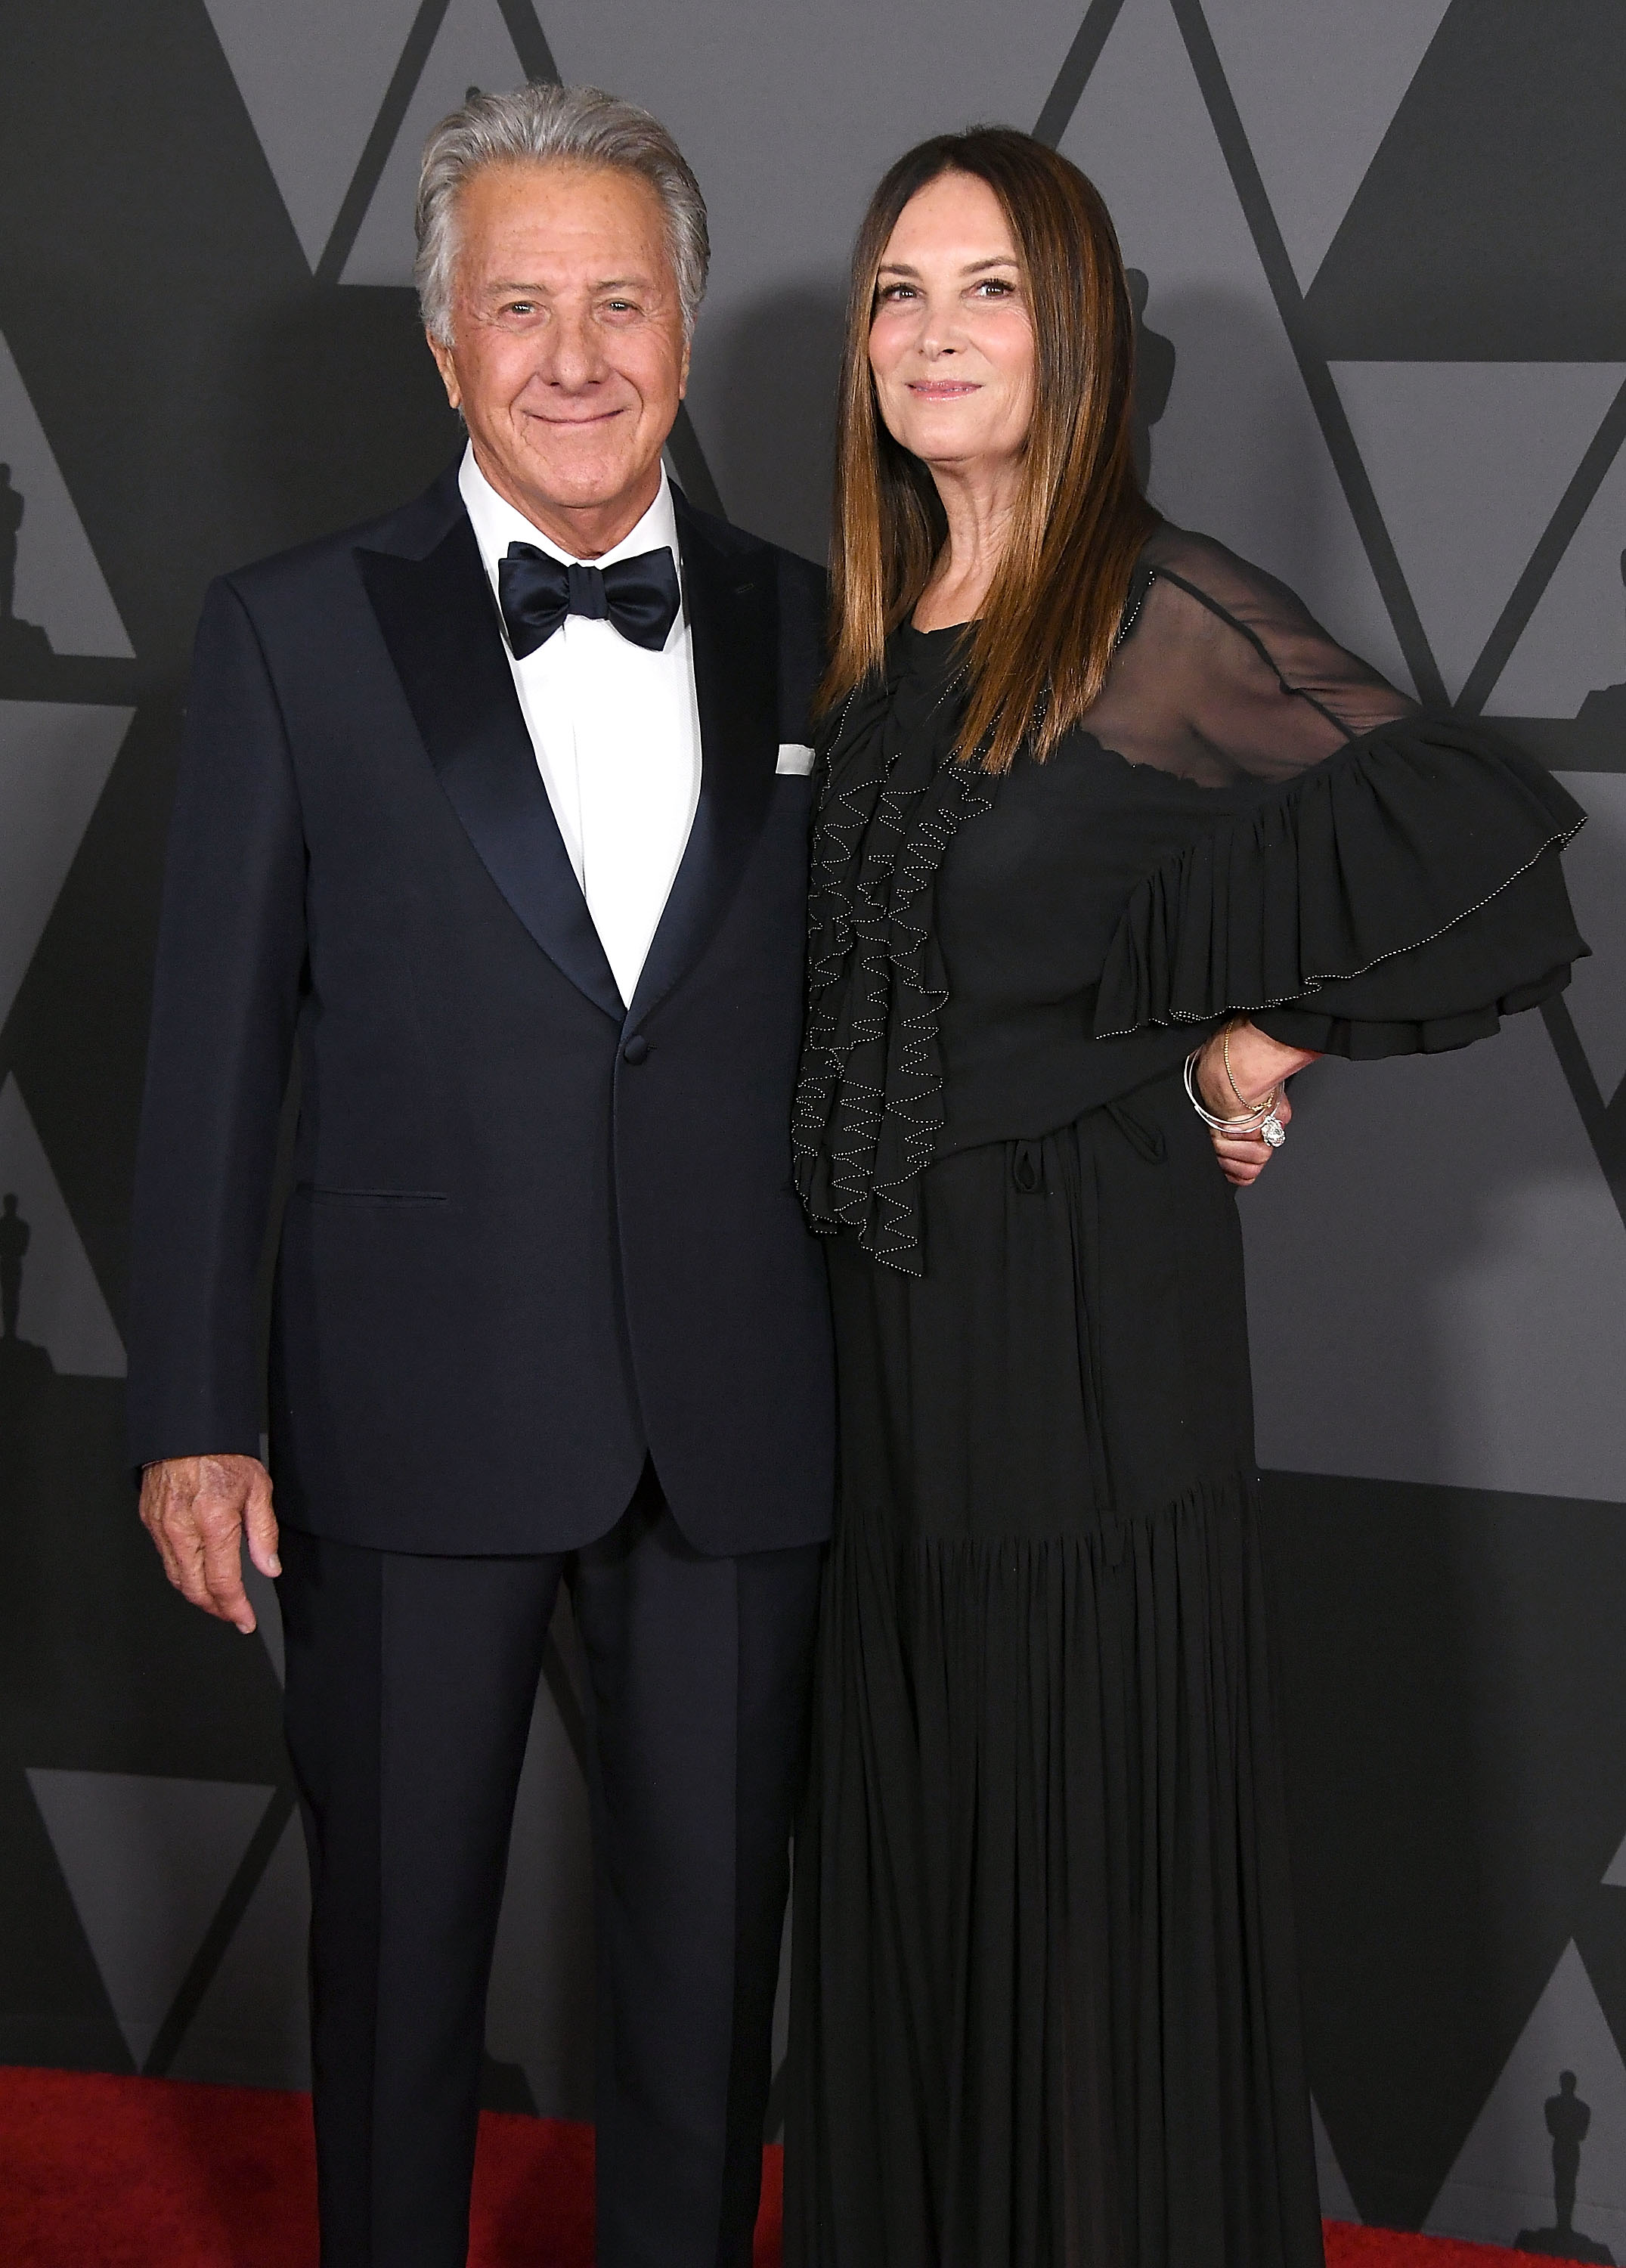 Dustin Hoffman und Lisa Hoffman bei den 9th Annual Governors Awards der Academy Of Motion Picture Arts And Sciences in Hollywood, Kalifornien am 11. November 2017. | Quelle: Getty Images